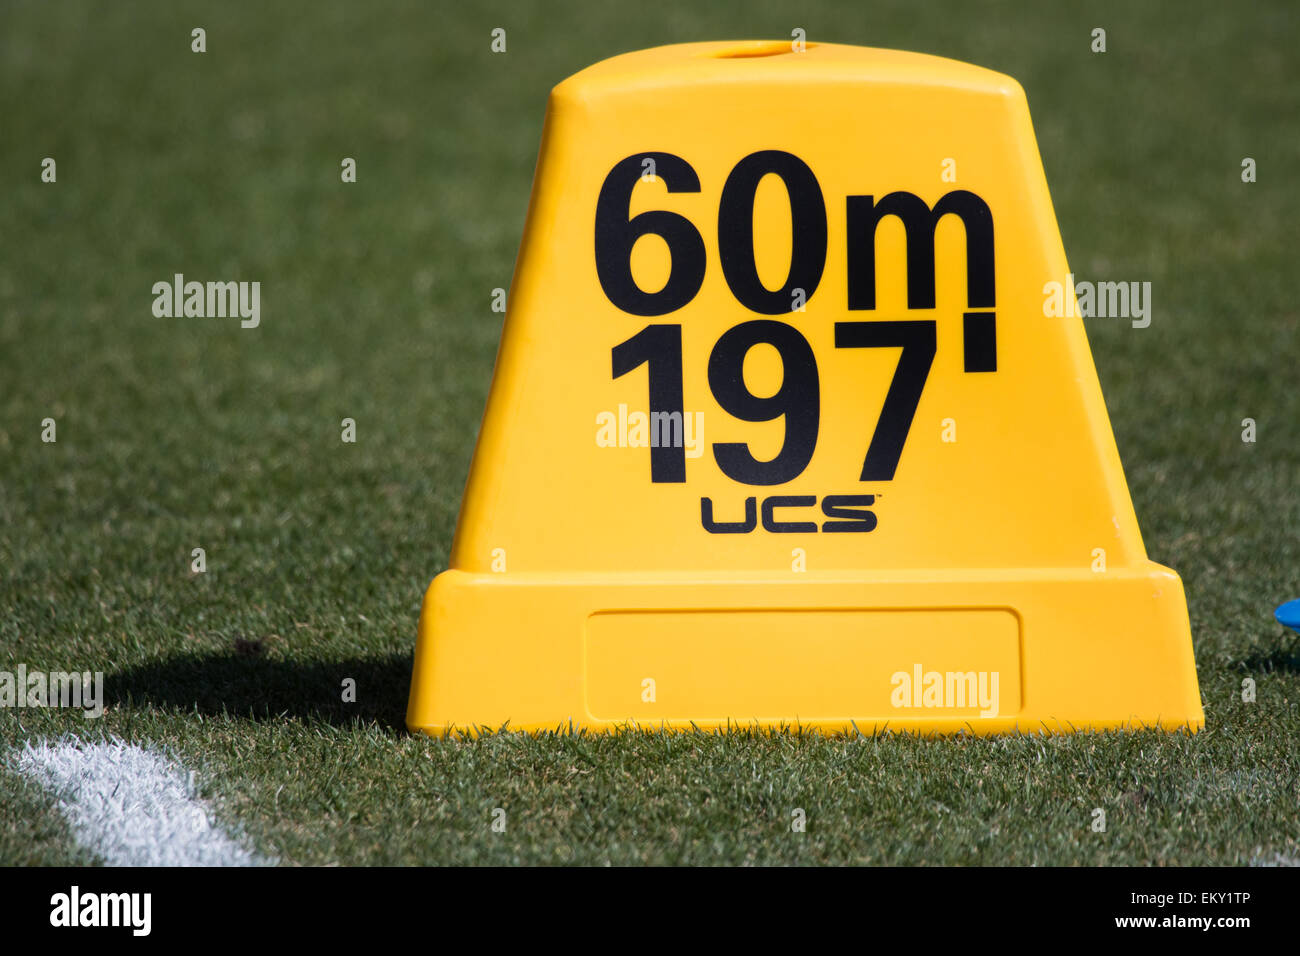 Track and field throwing Distance marker in feet and meters Stock Photo -  Alamy